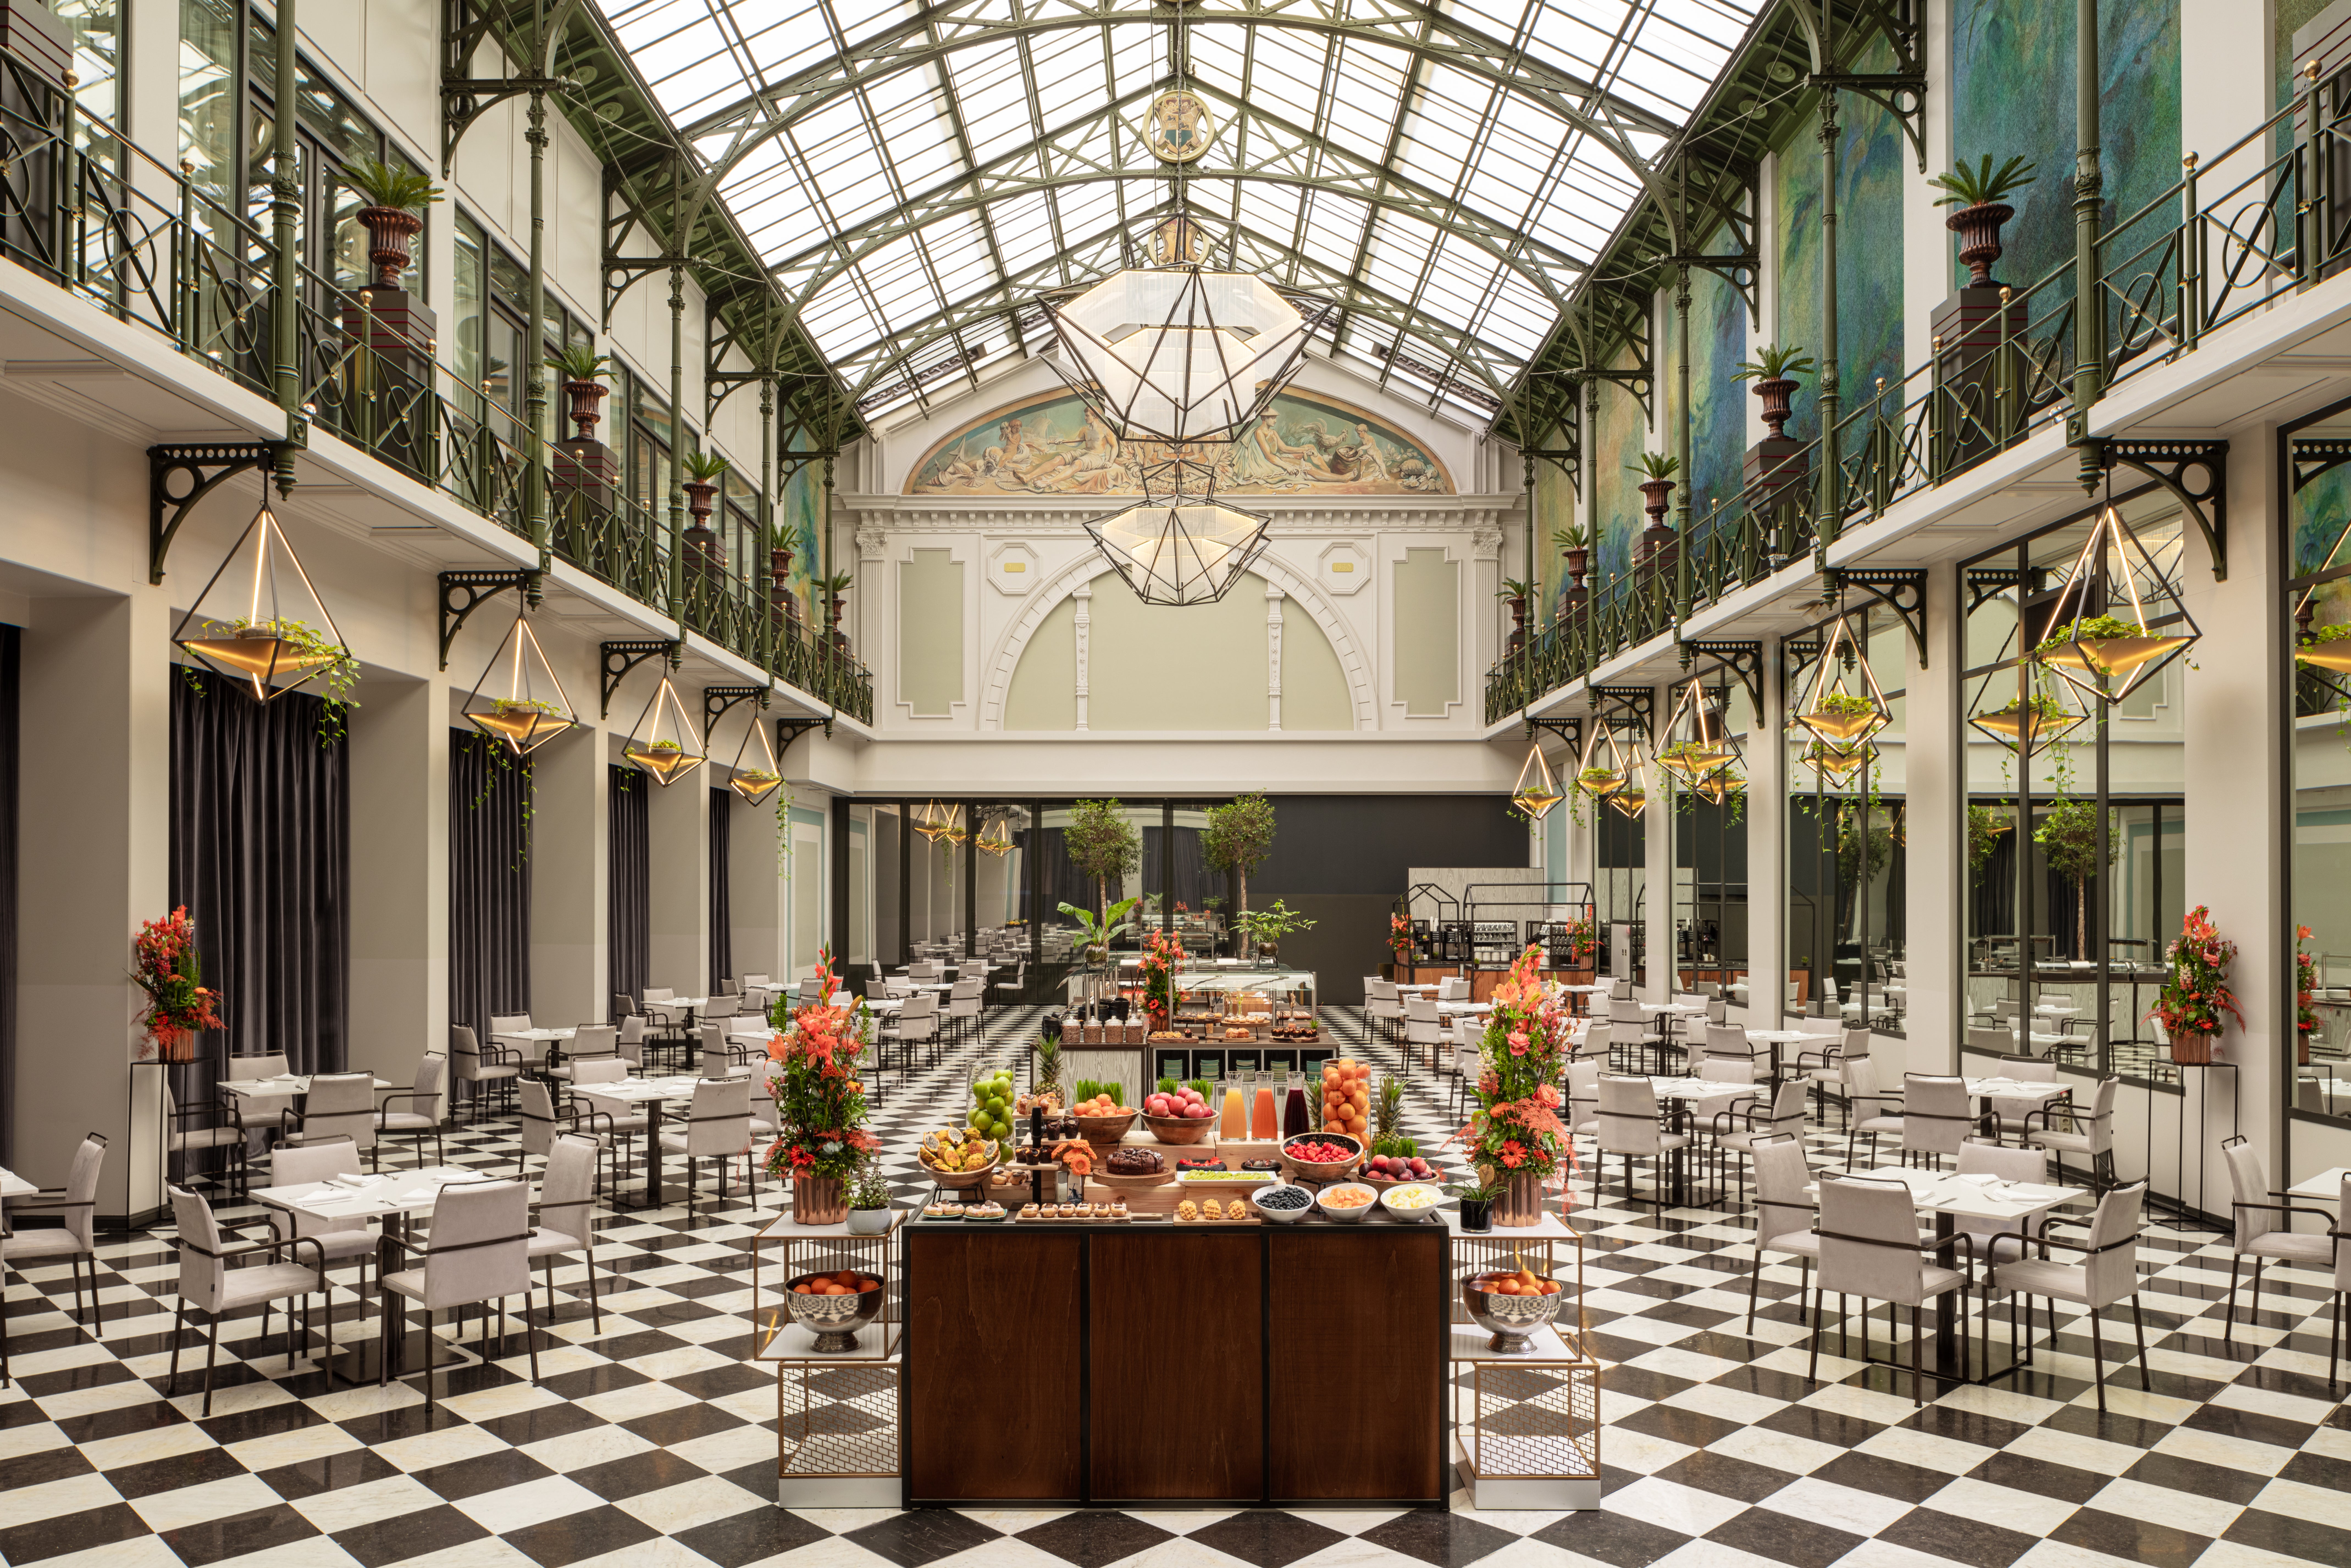 The Wintergarden, a glorious space at the heart of the property